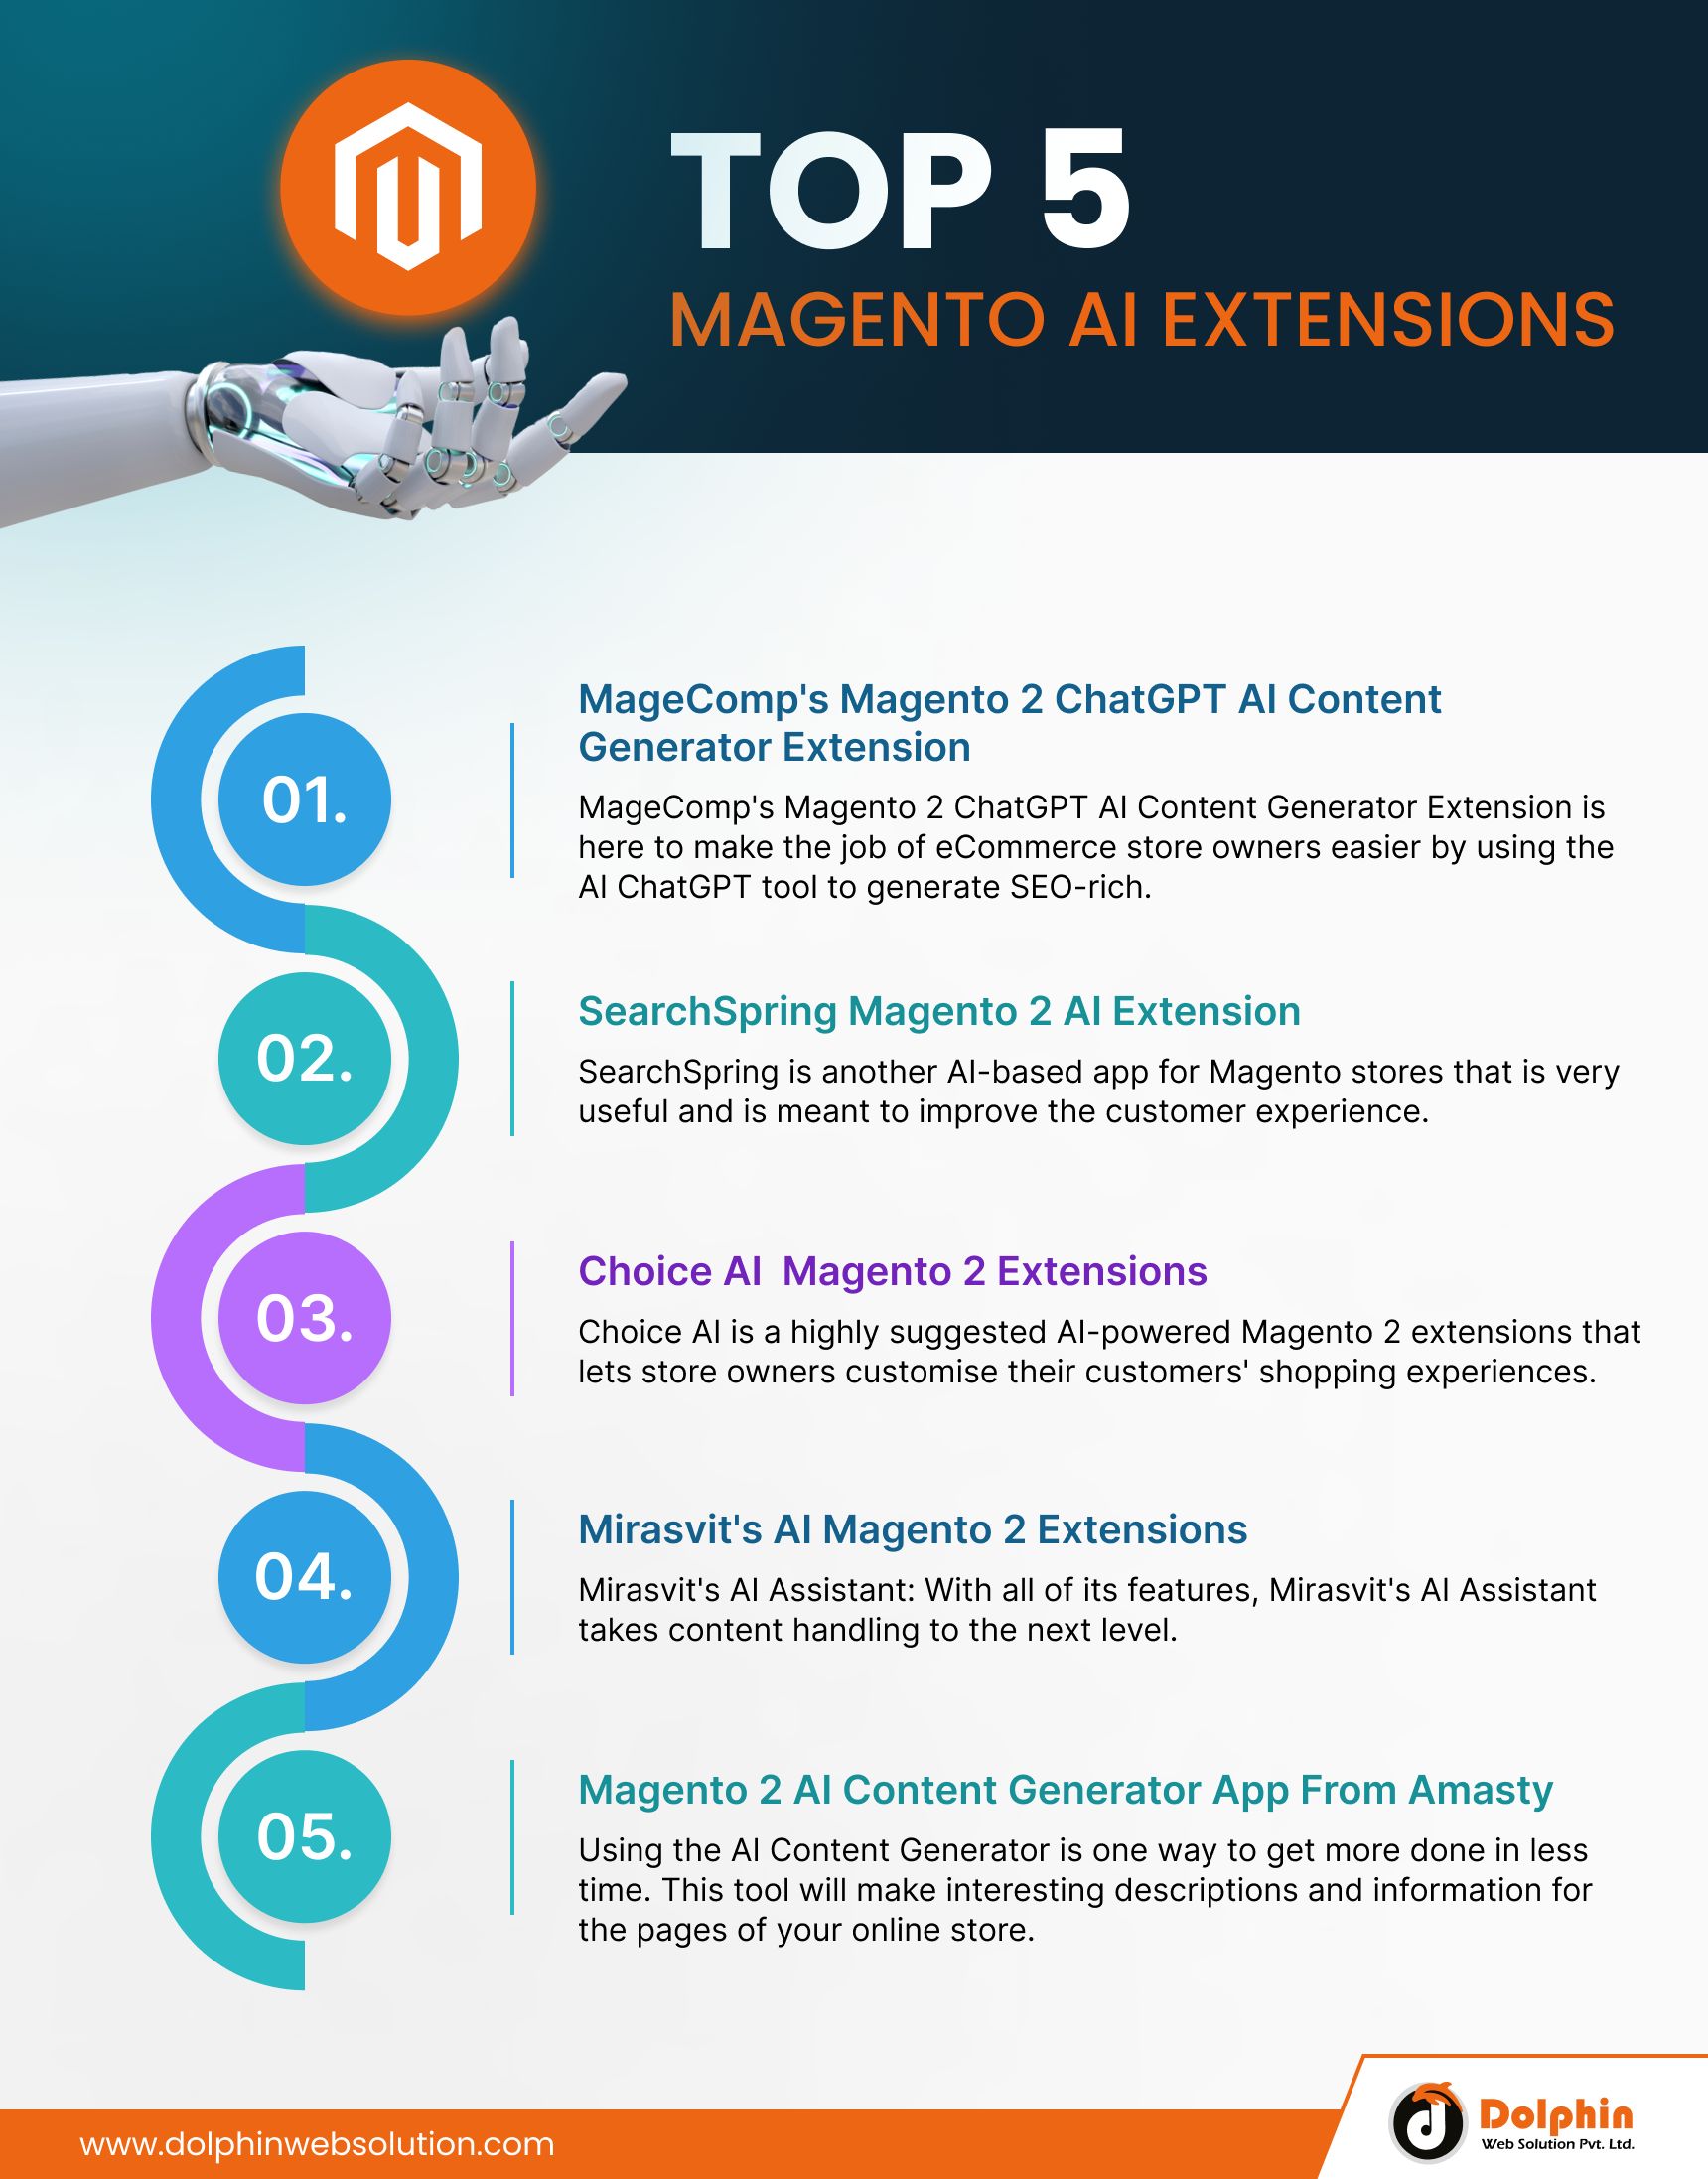 Top 5 Magento AI Extensions